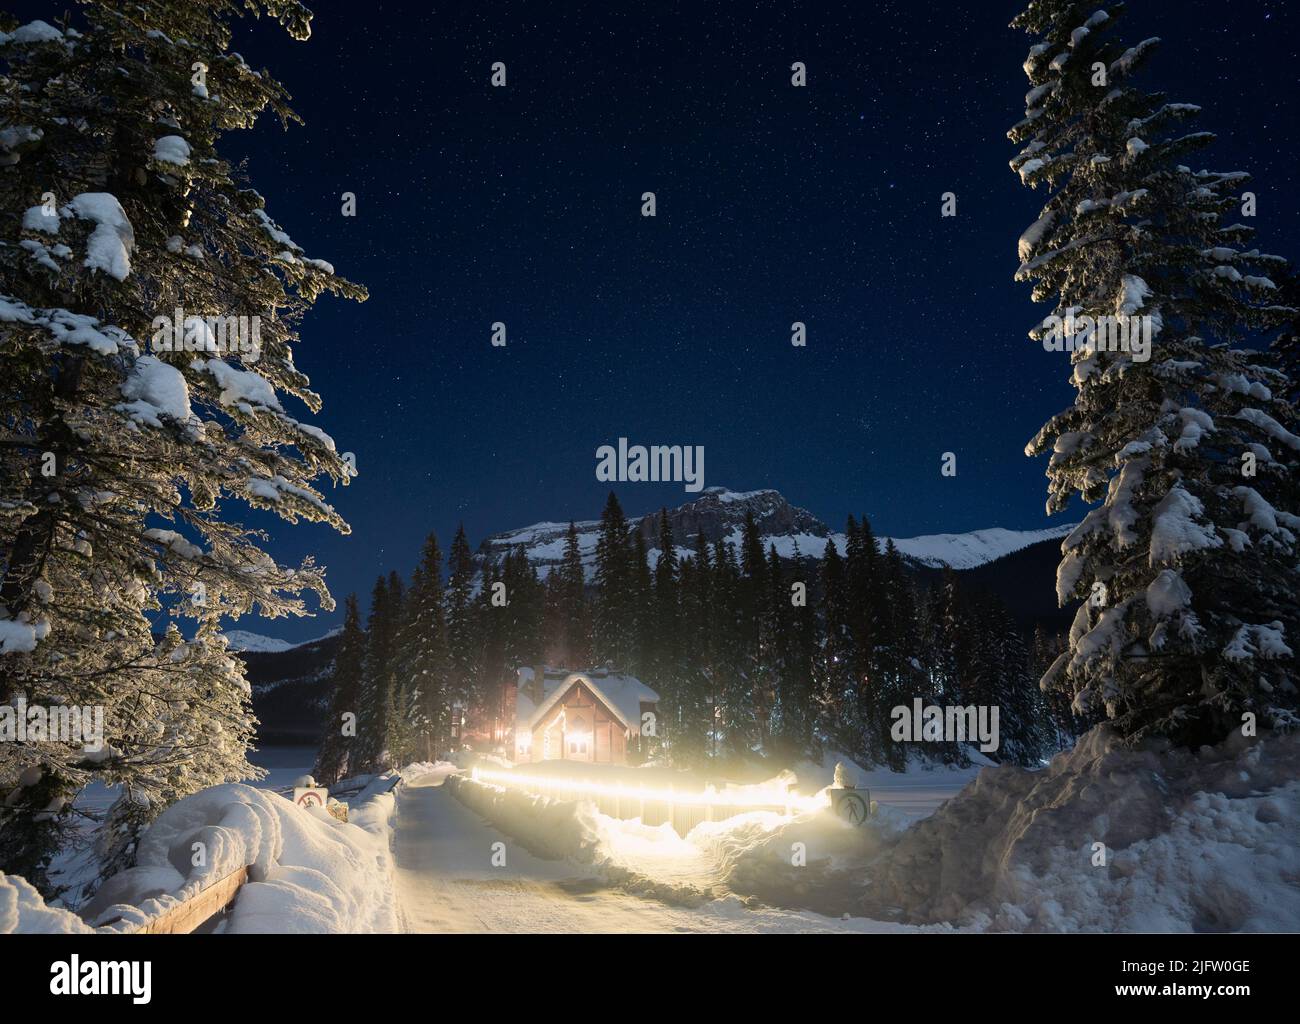 Small hut in a winter forest surrounded by trees, mountains with bright stars above, Yoho NP, Canada Stock Photo